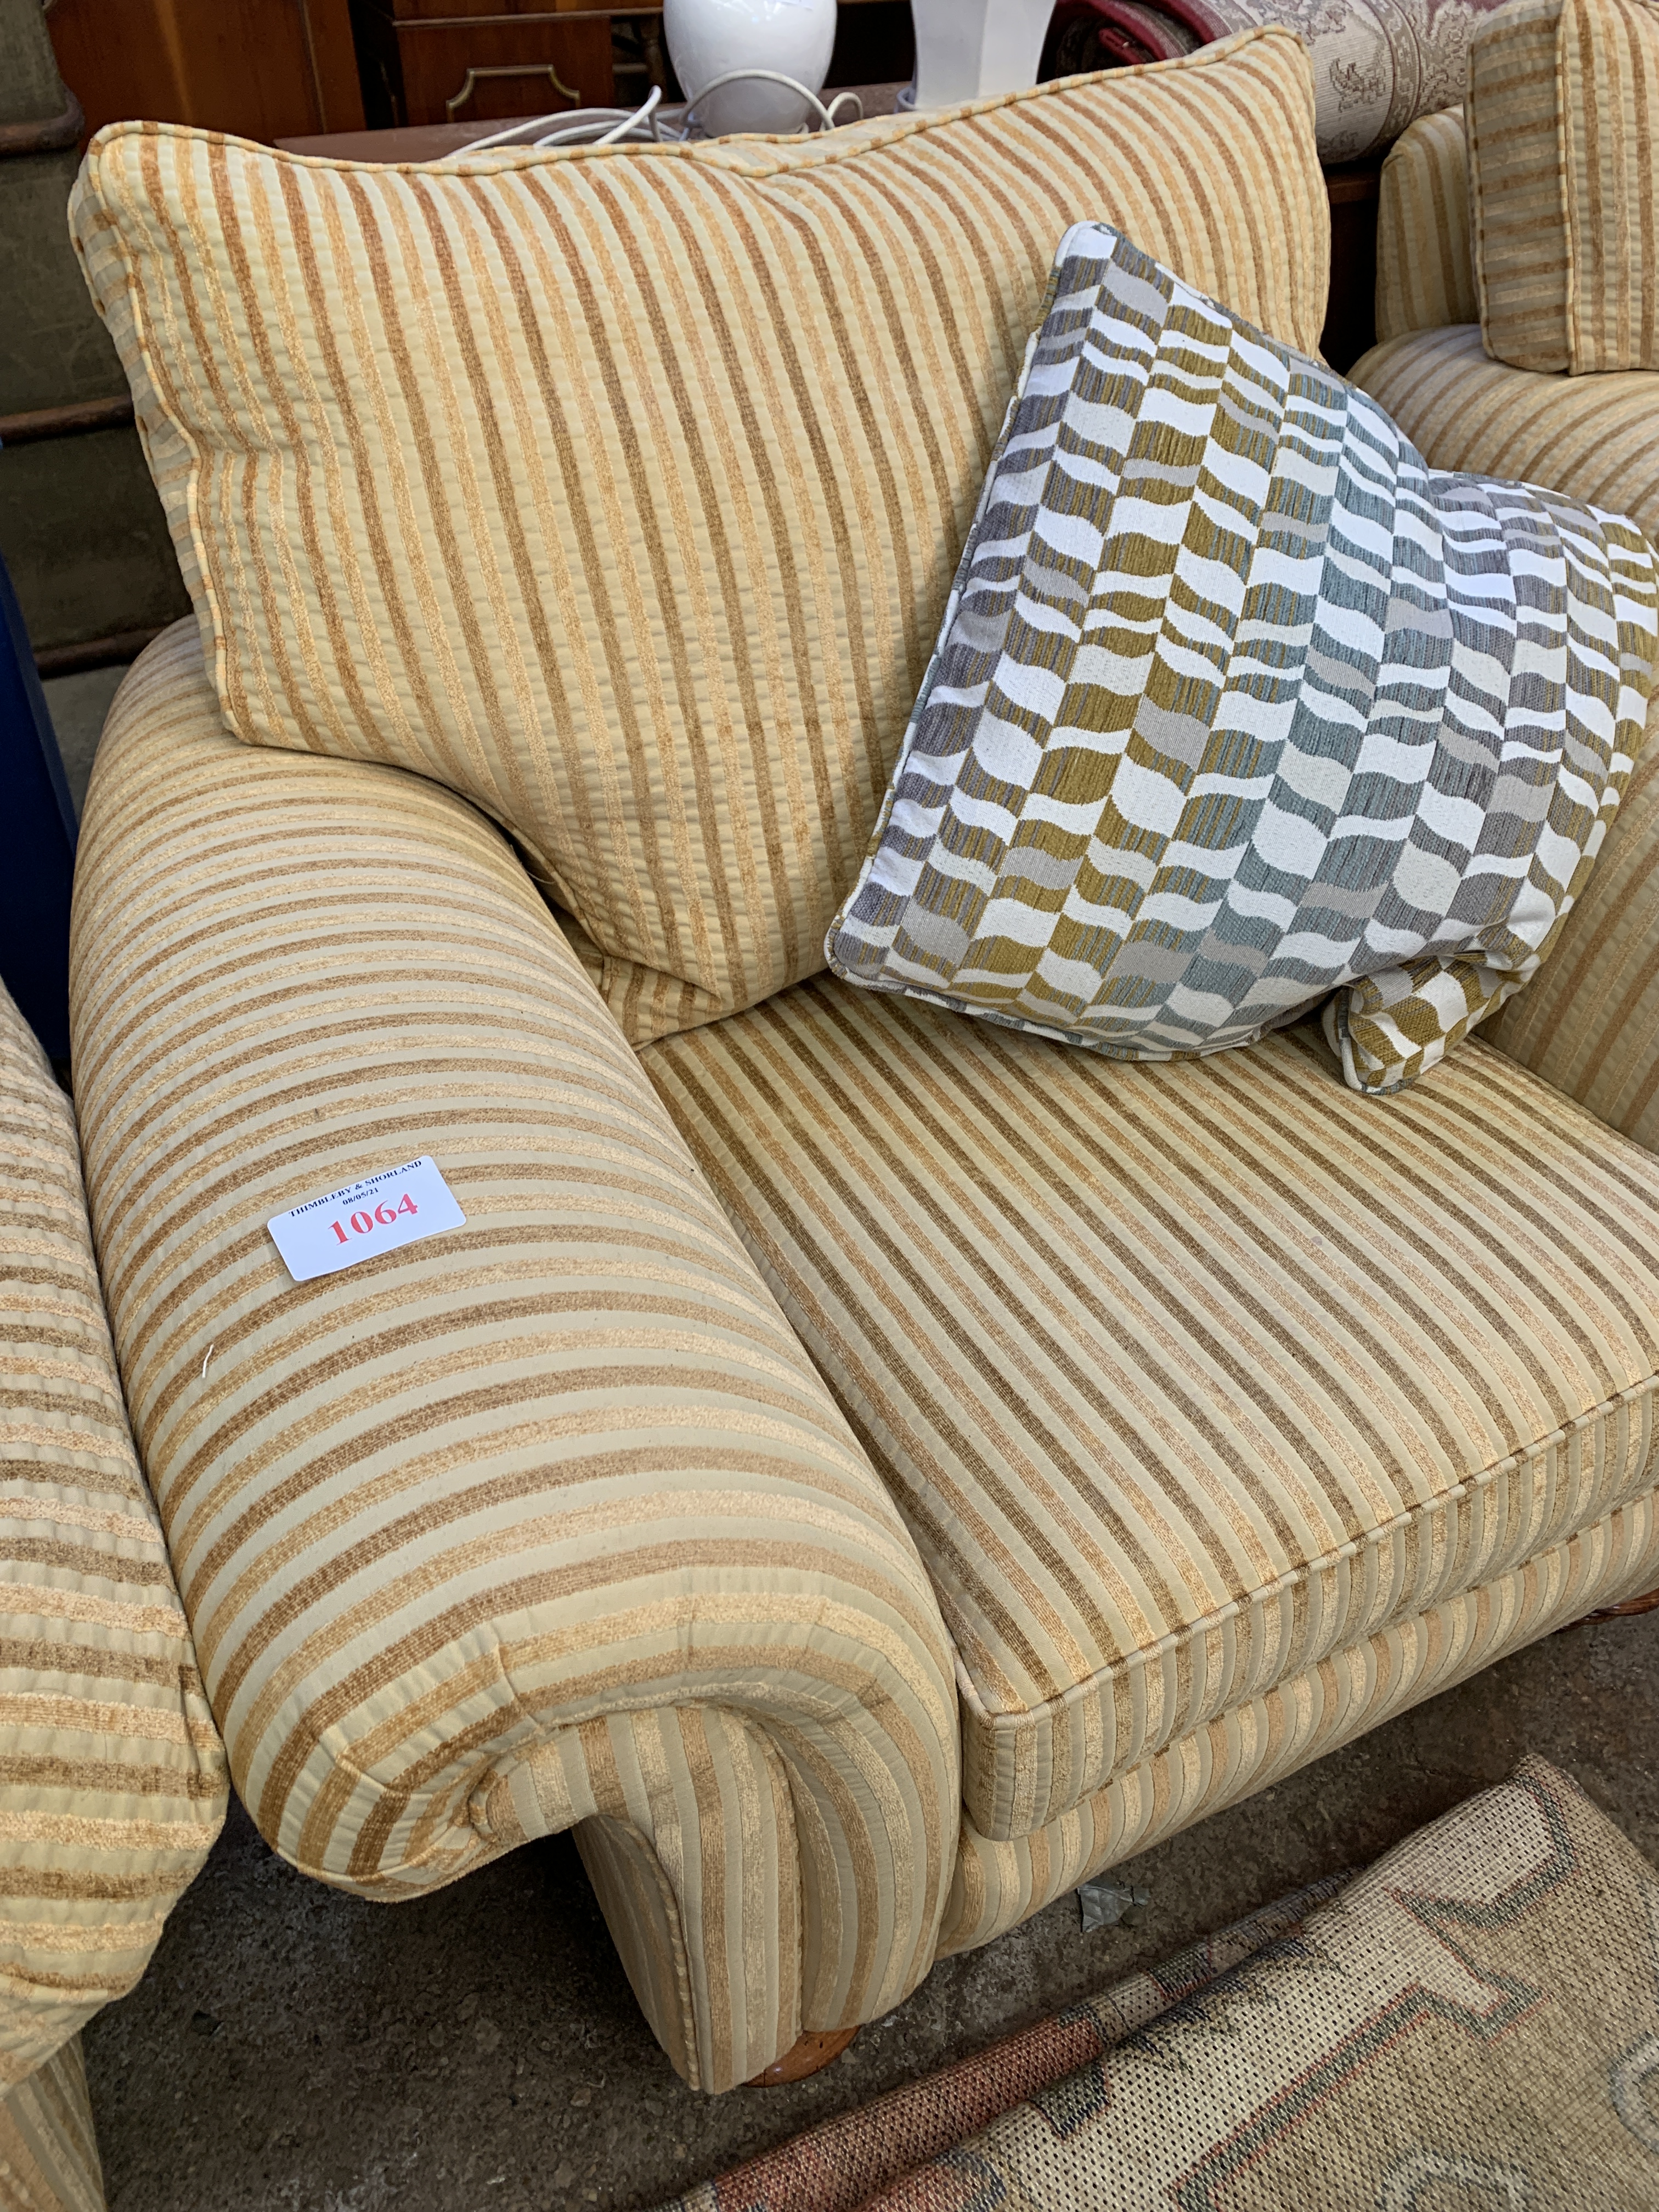 Two armchairs upholstered in gold coloured striped fabric - Image 3 of 4